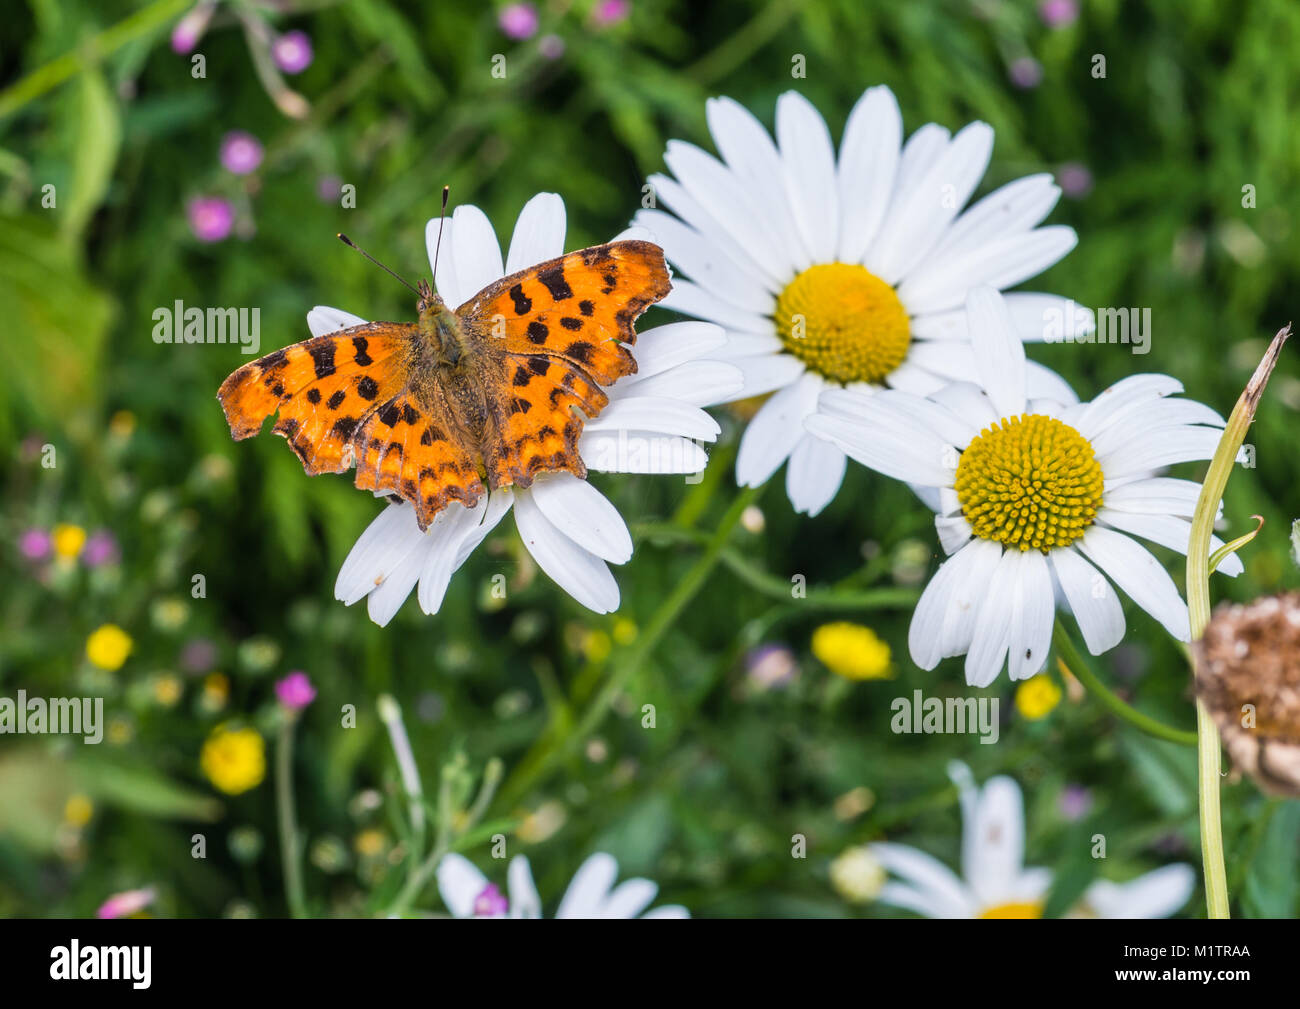 A macro shot of a comma butterfly sitting on an ox eye daisy. Stock Photo